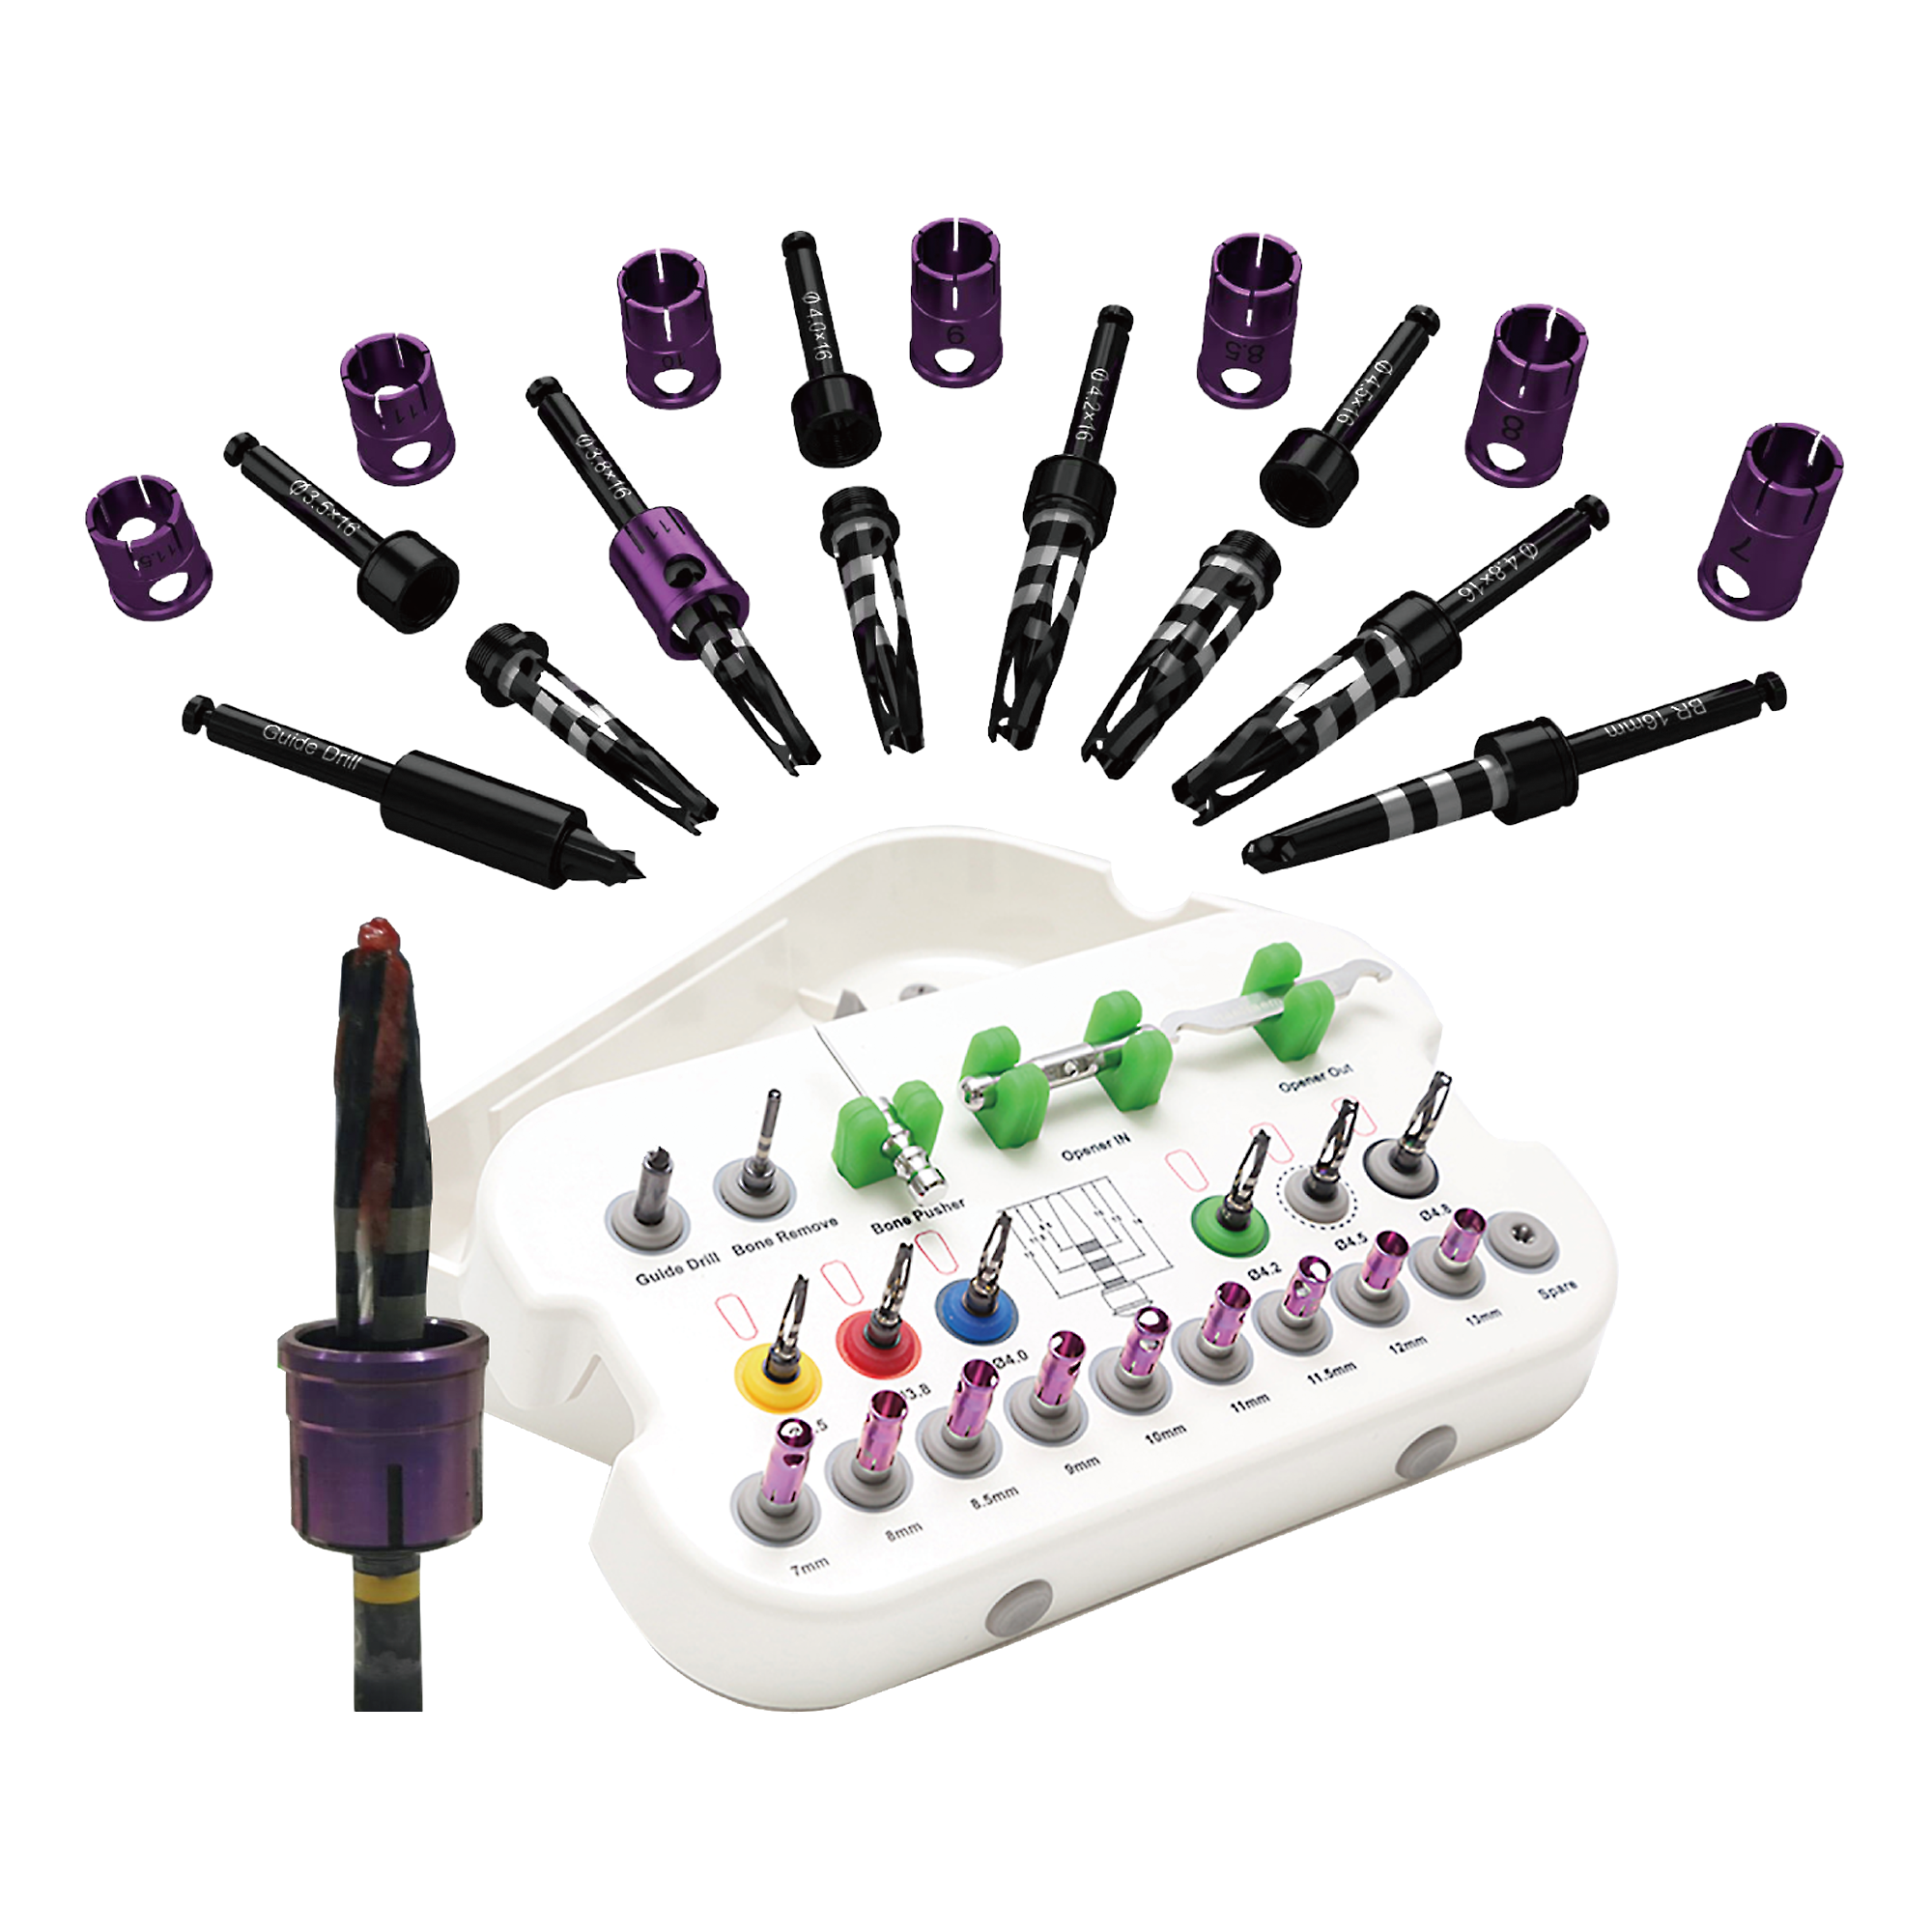 DSI One Drilling System Kit For Implant Osteotomy Preparation